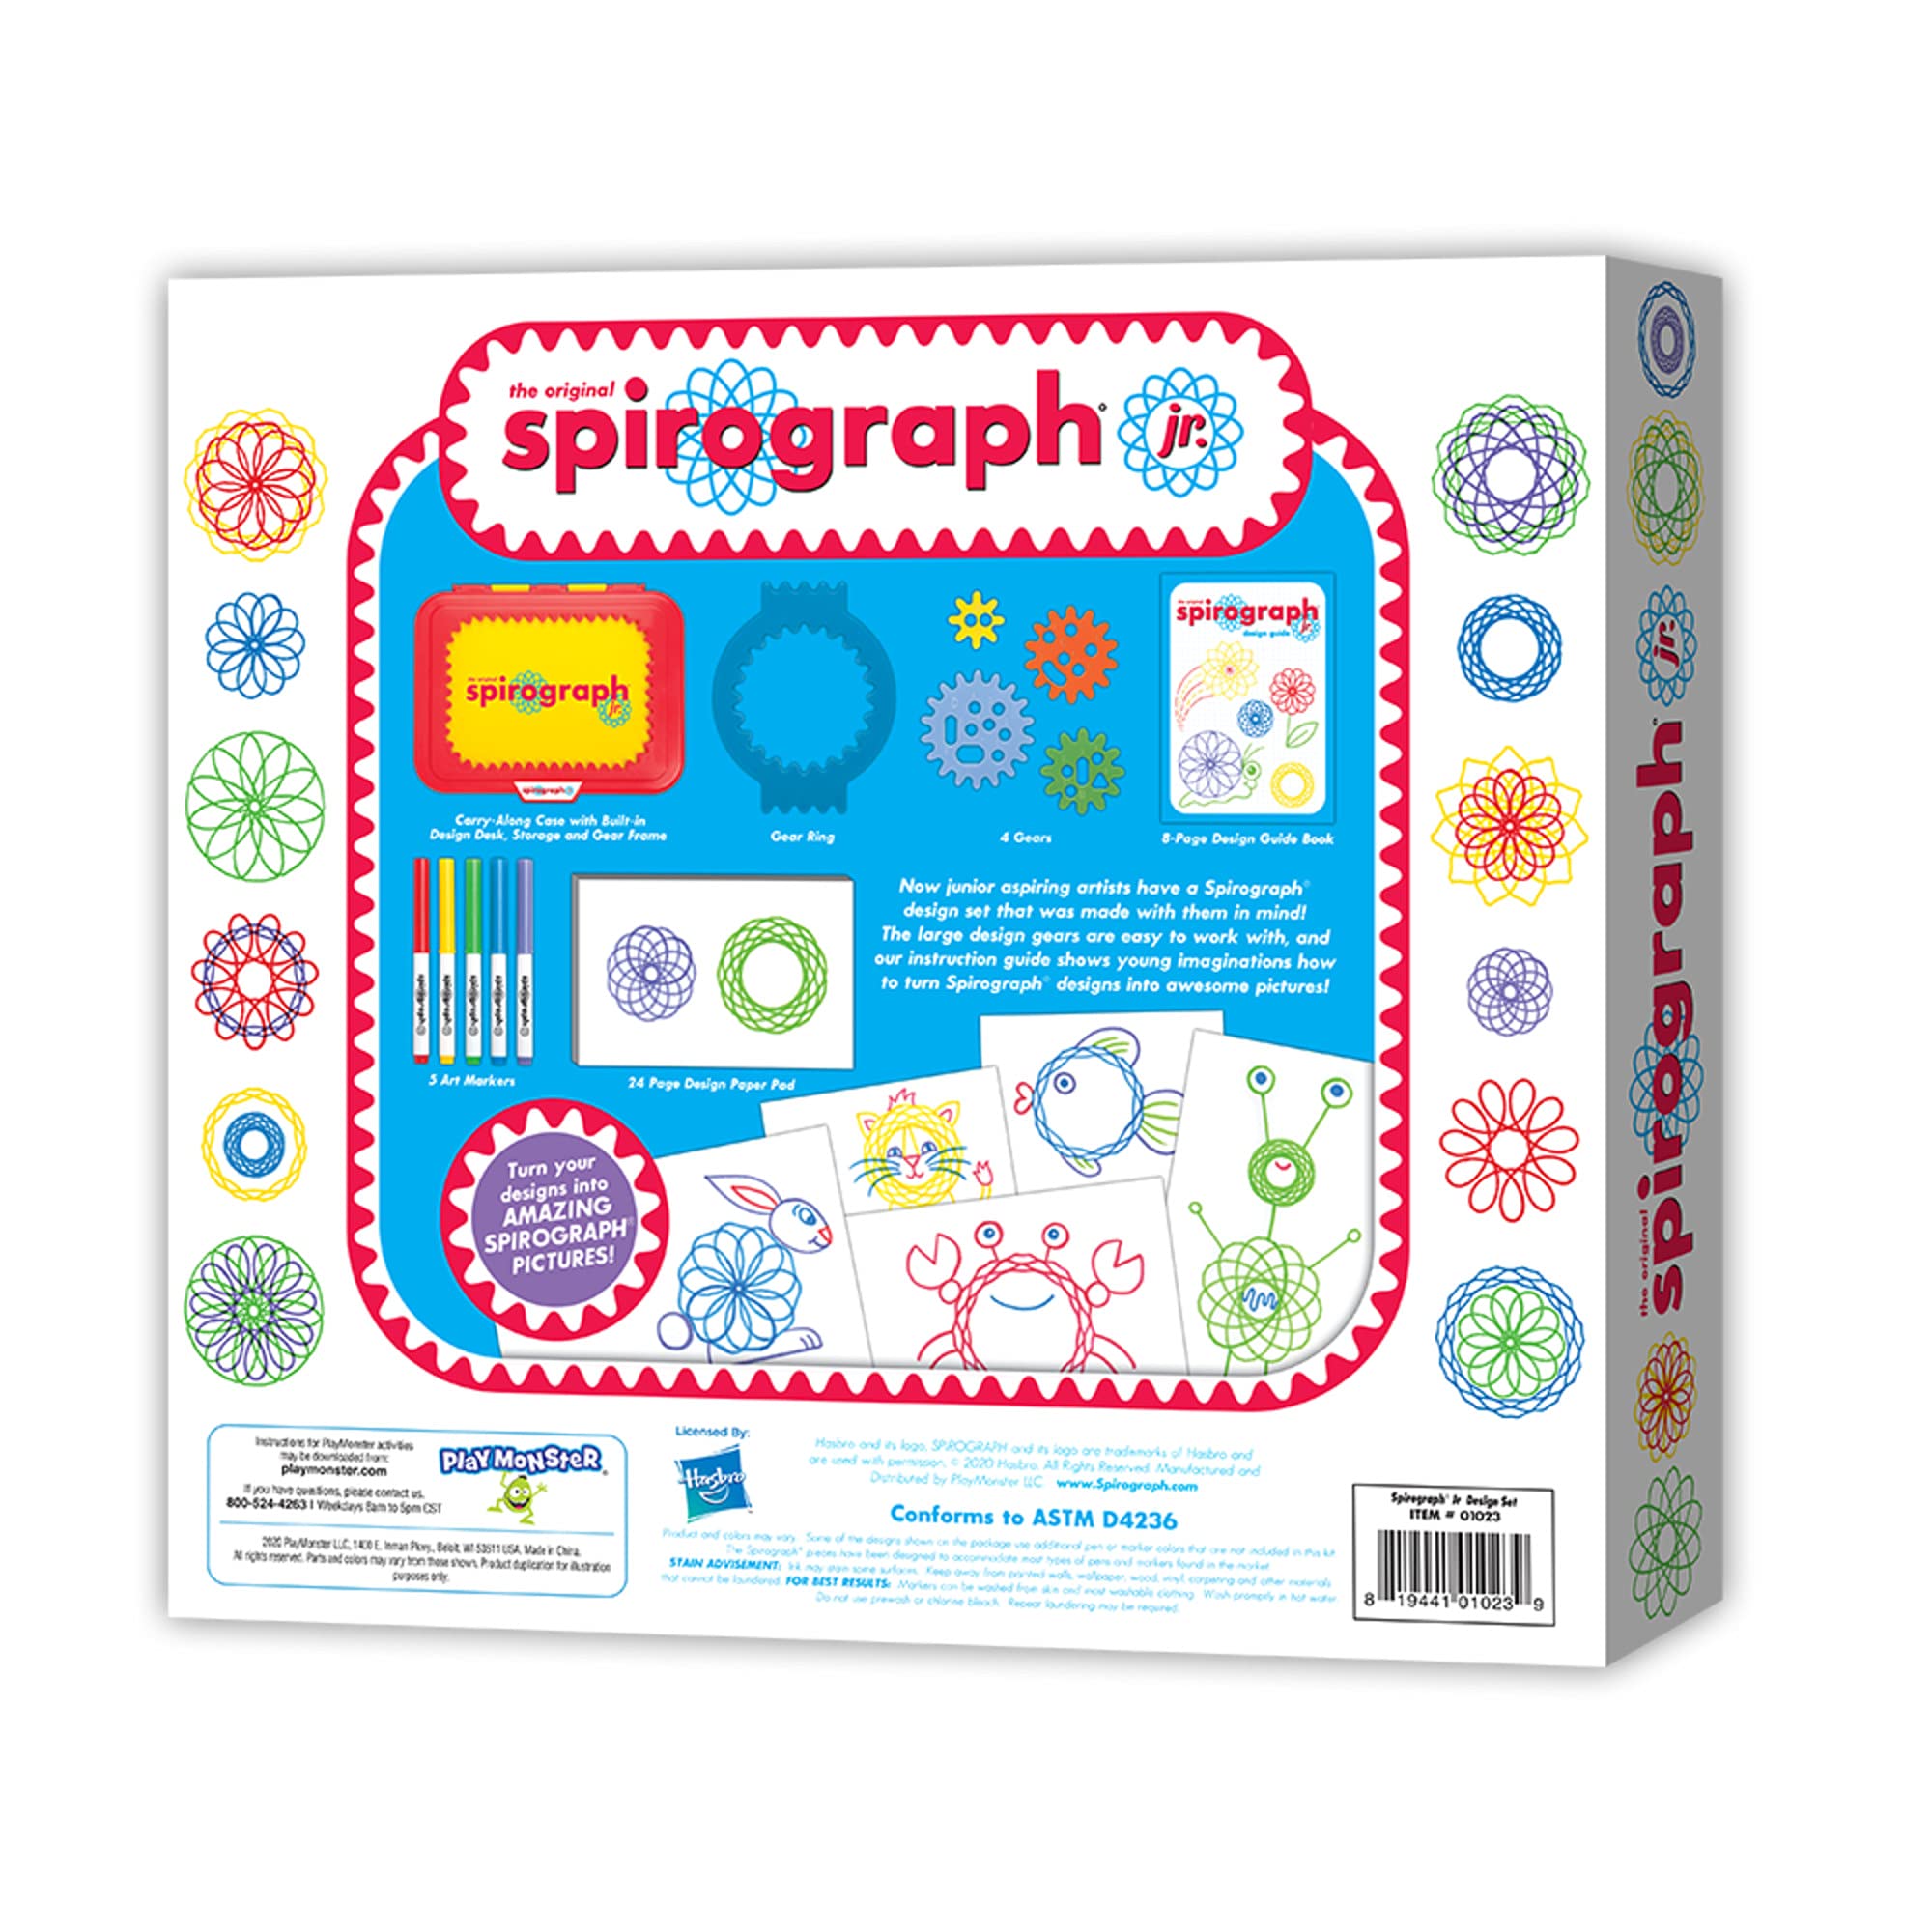 Spirograph Jr. — Jumbo Sized Gears — Arts and Craft Design Kit for Smaller Hands — for Ages 3+